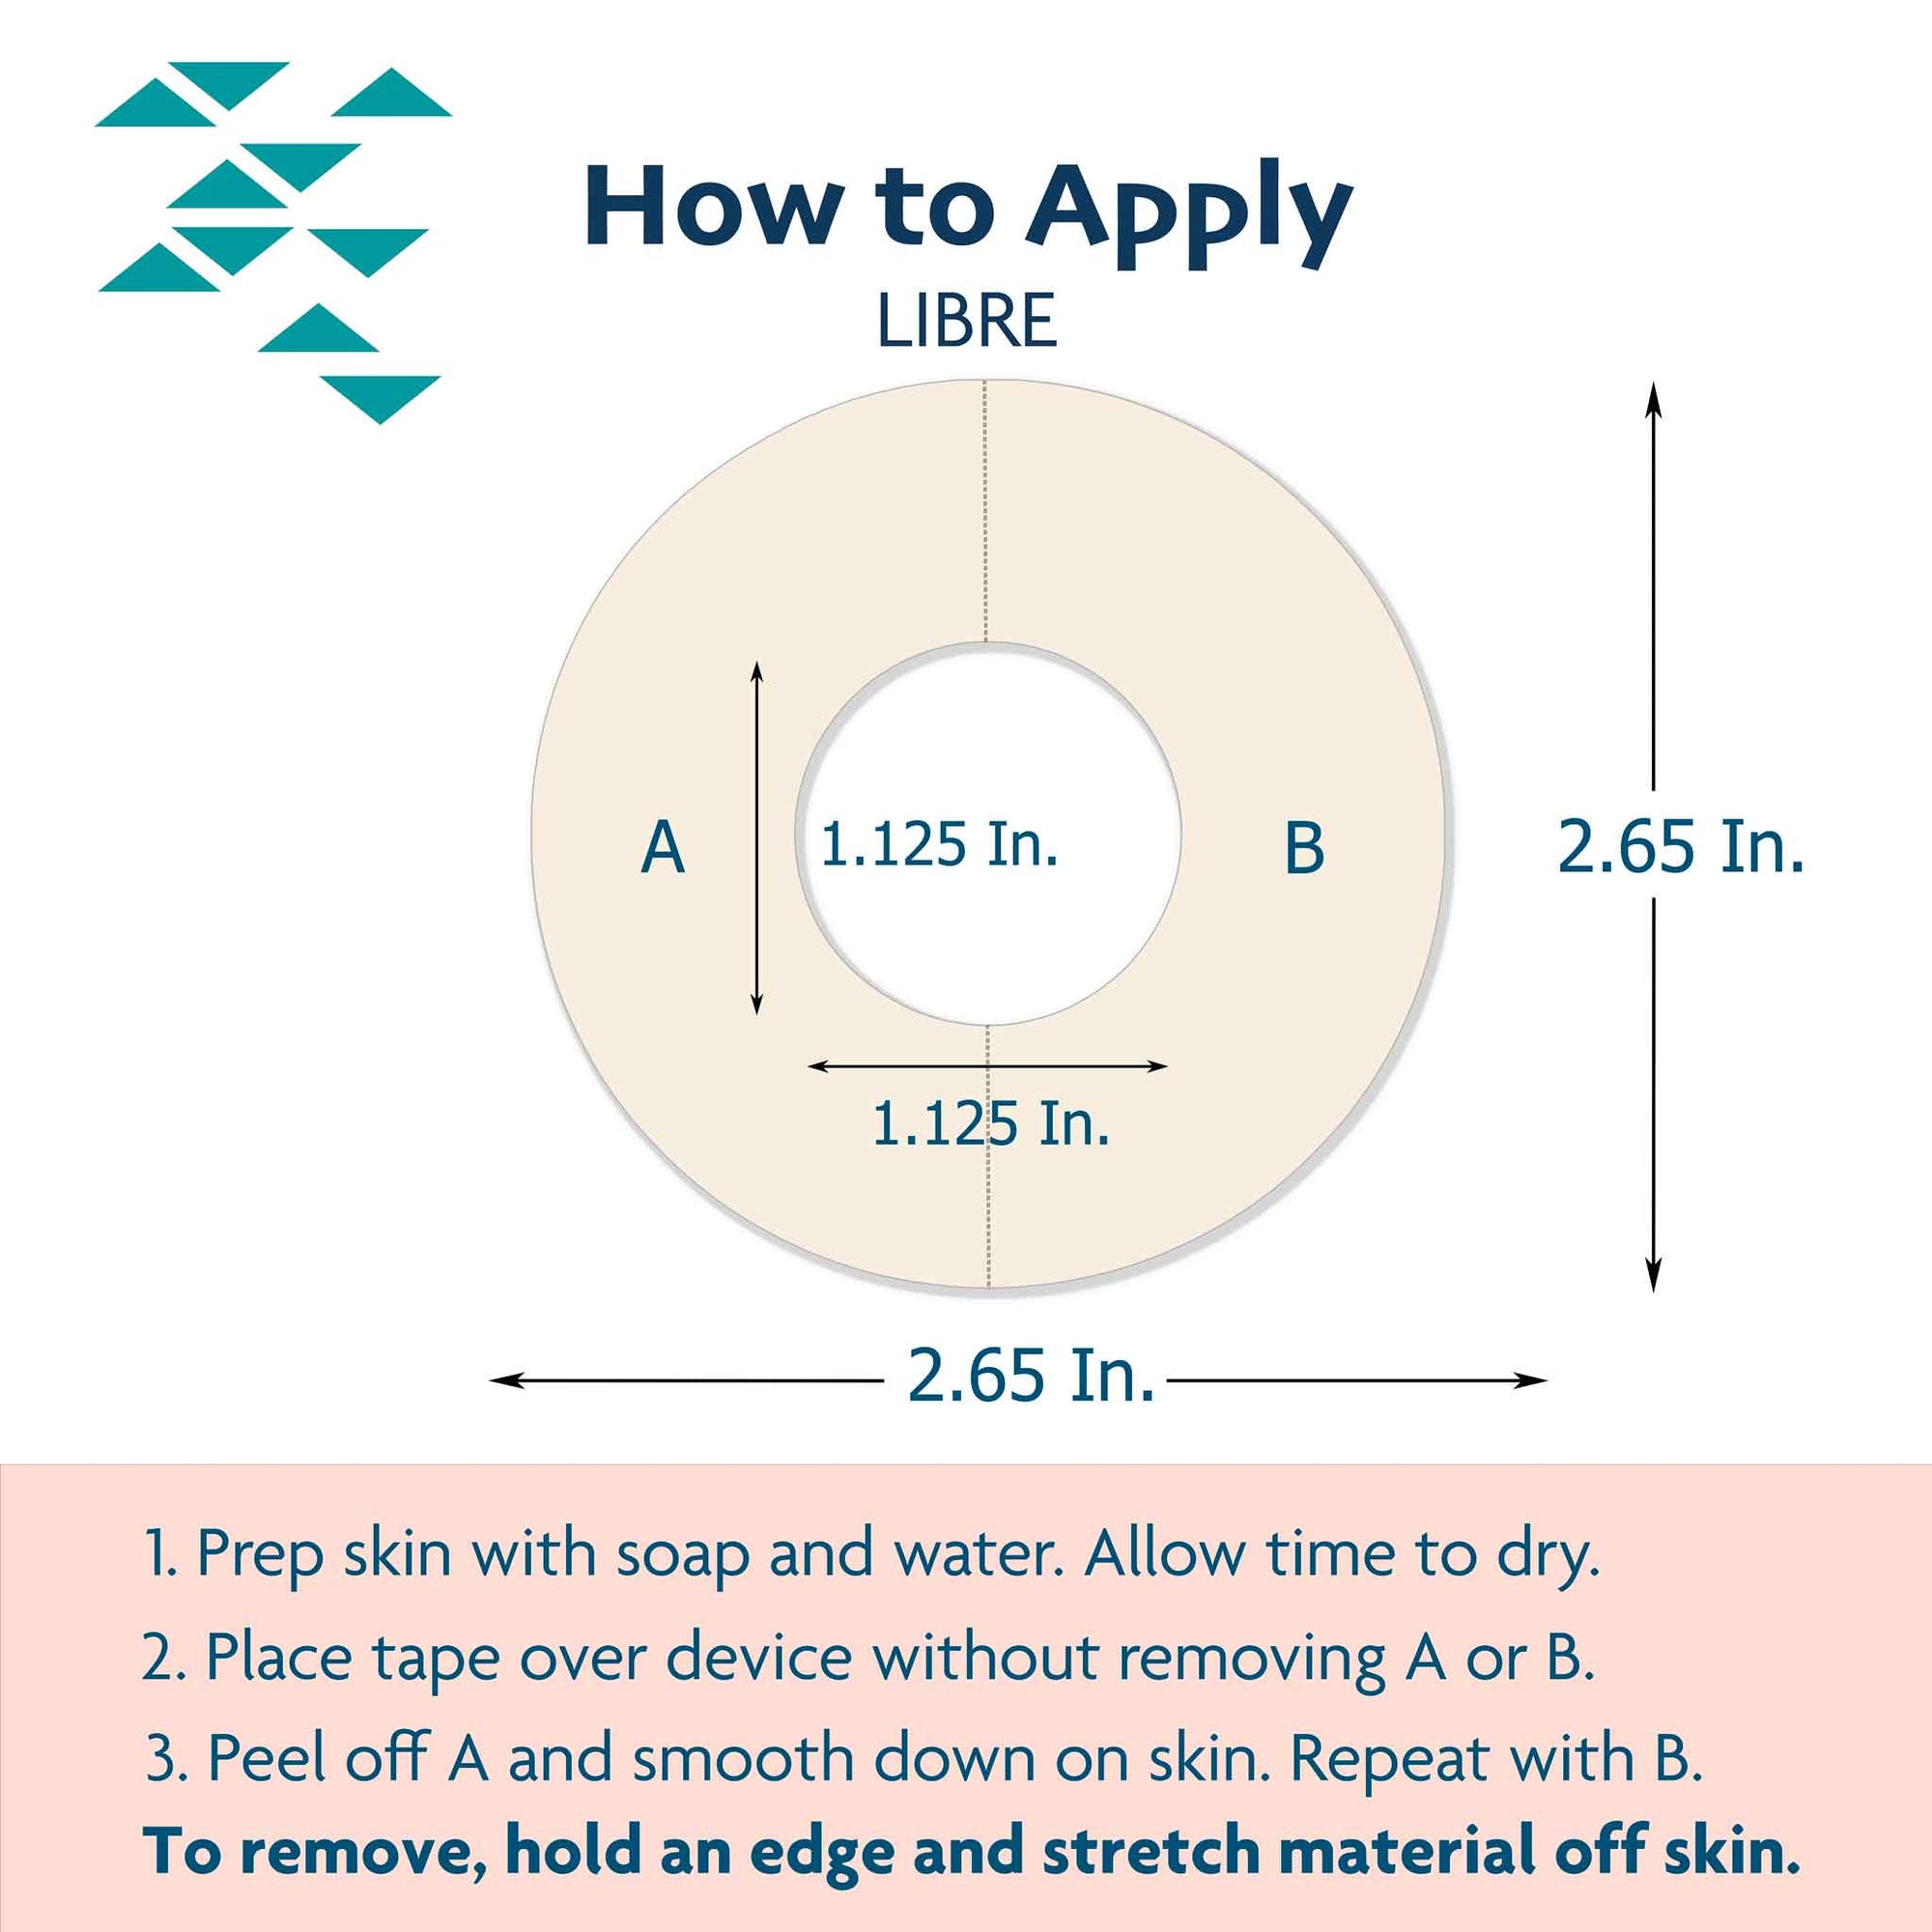 ExpressionMed Libre Tape application to CGM Device how to, Abbott Lingo